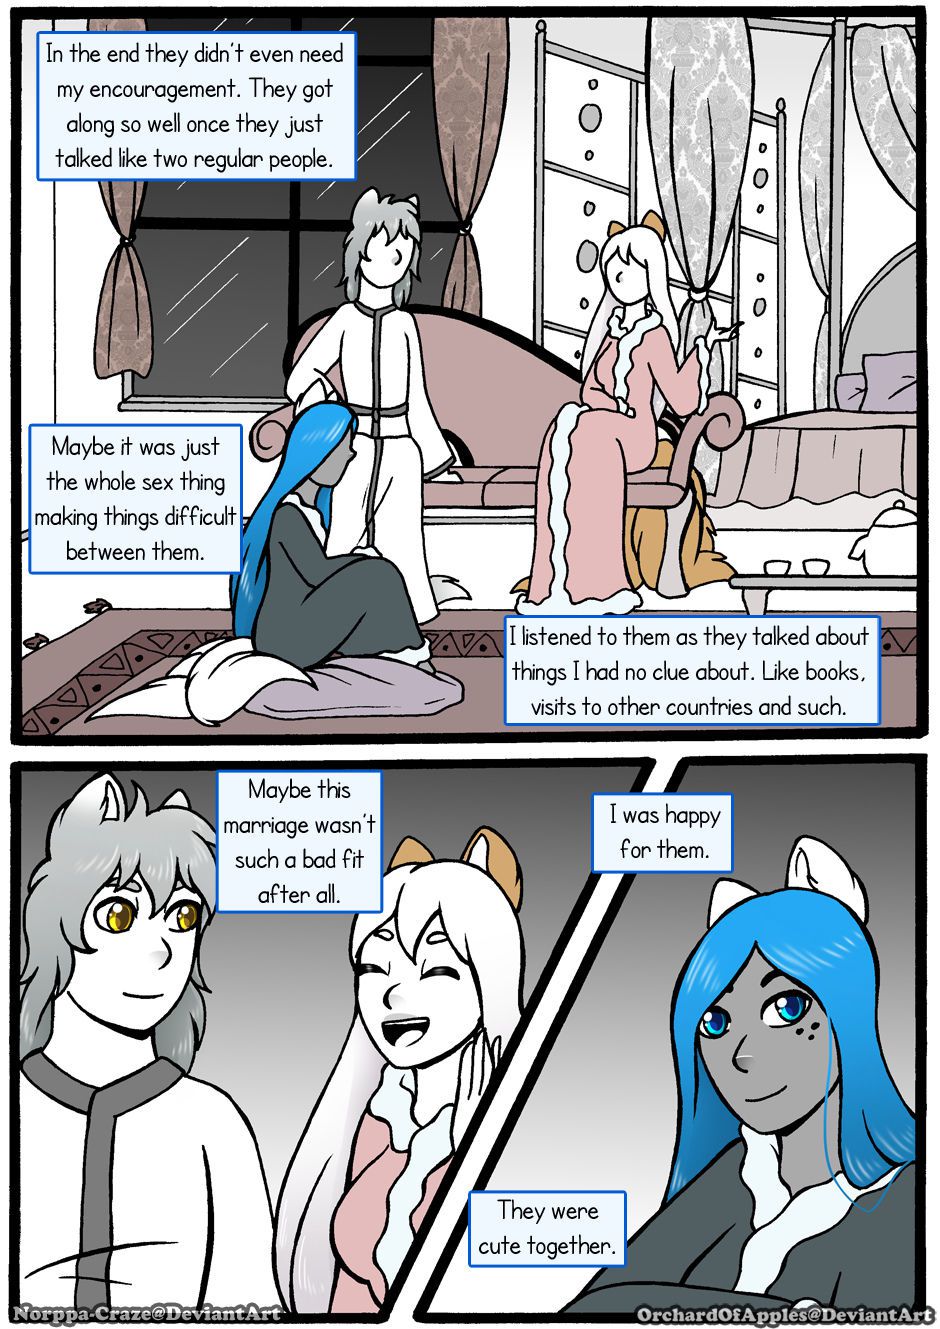 [Jeny-jen94] Between Kings and Queens [Ongoing] 268